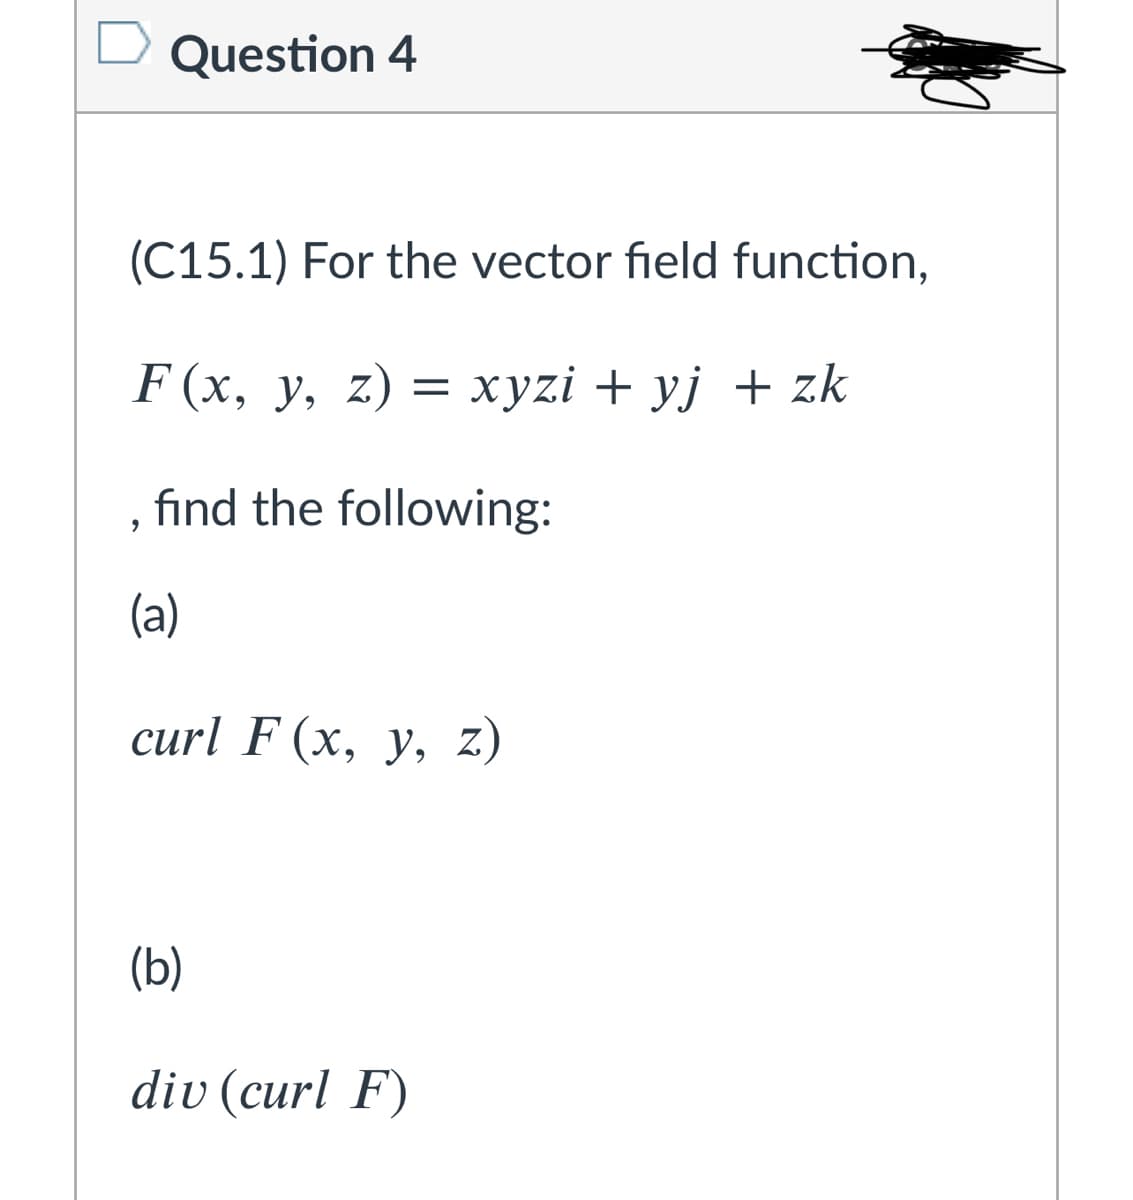 Question 4
(C15.1) For the vector field function,
F (x, y, z) = xyzi + yj + zk
fınd the following:
(a)
curl F (x, y, z,
(b)
div (curl F)
